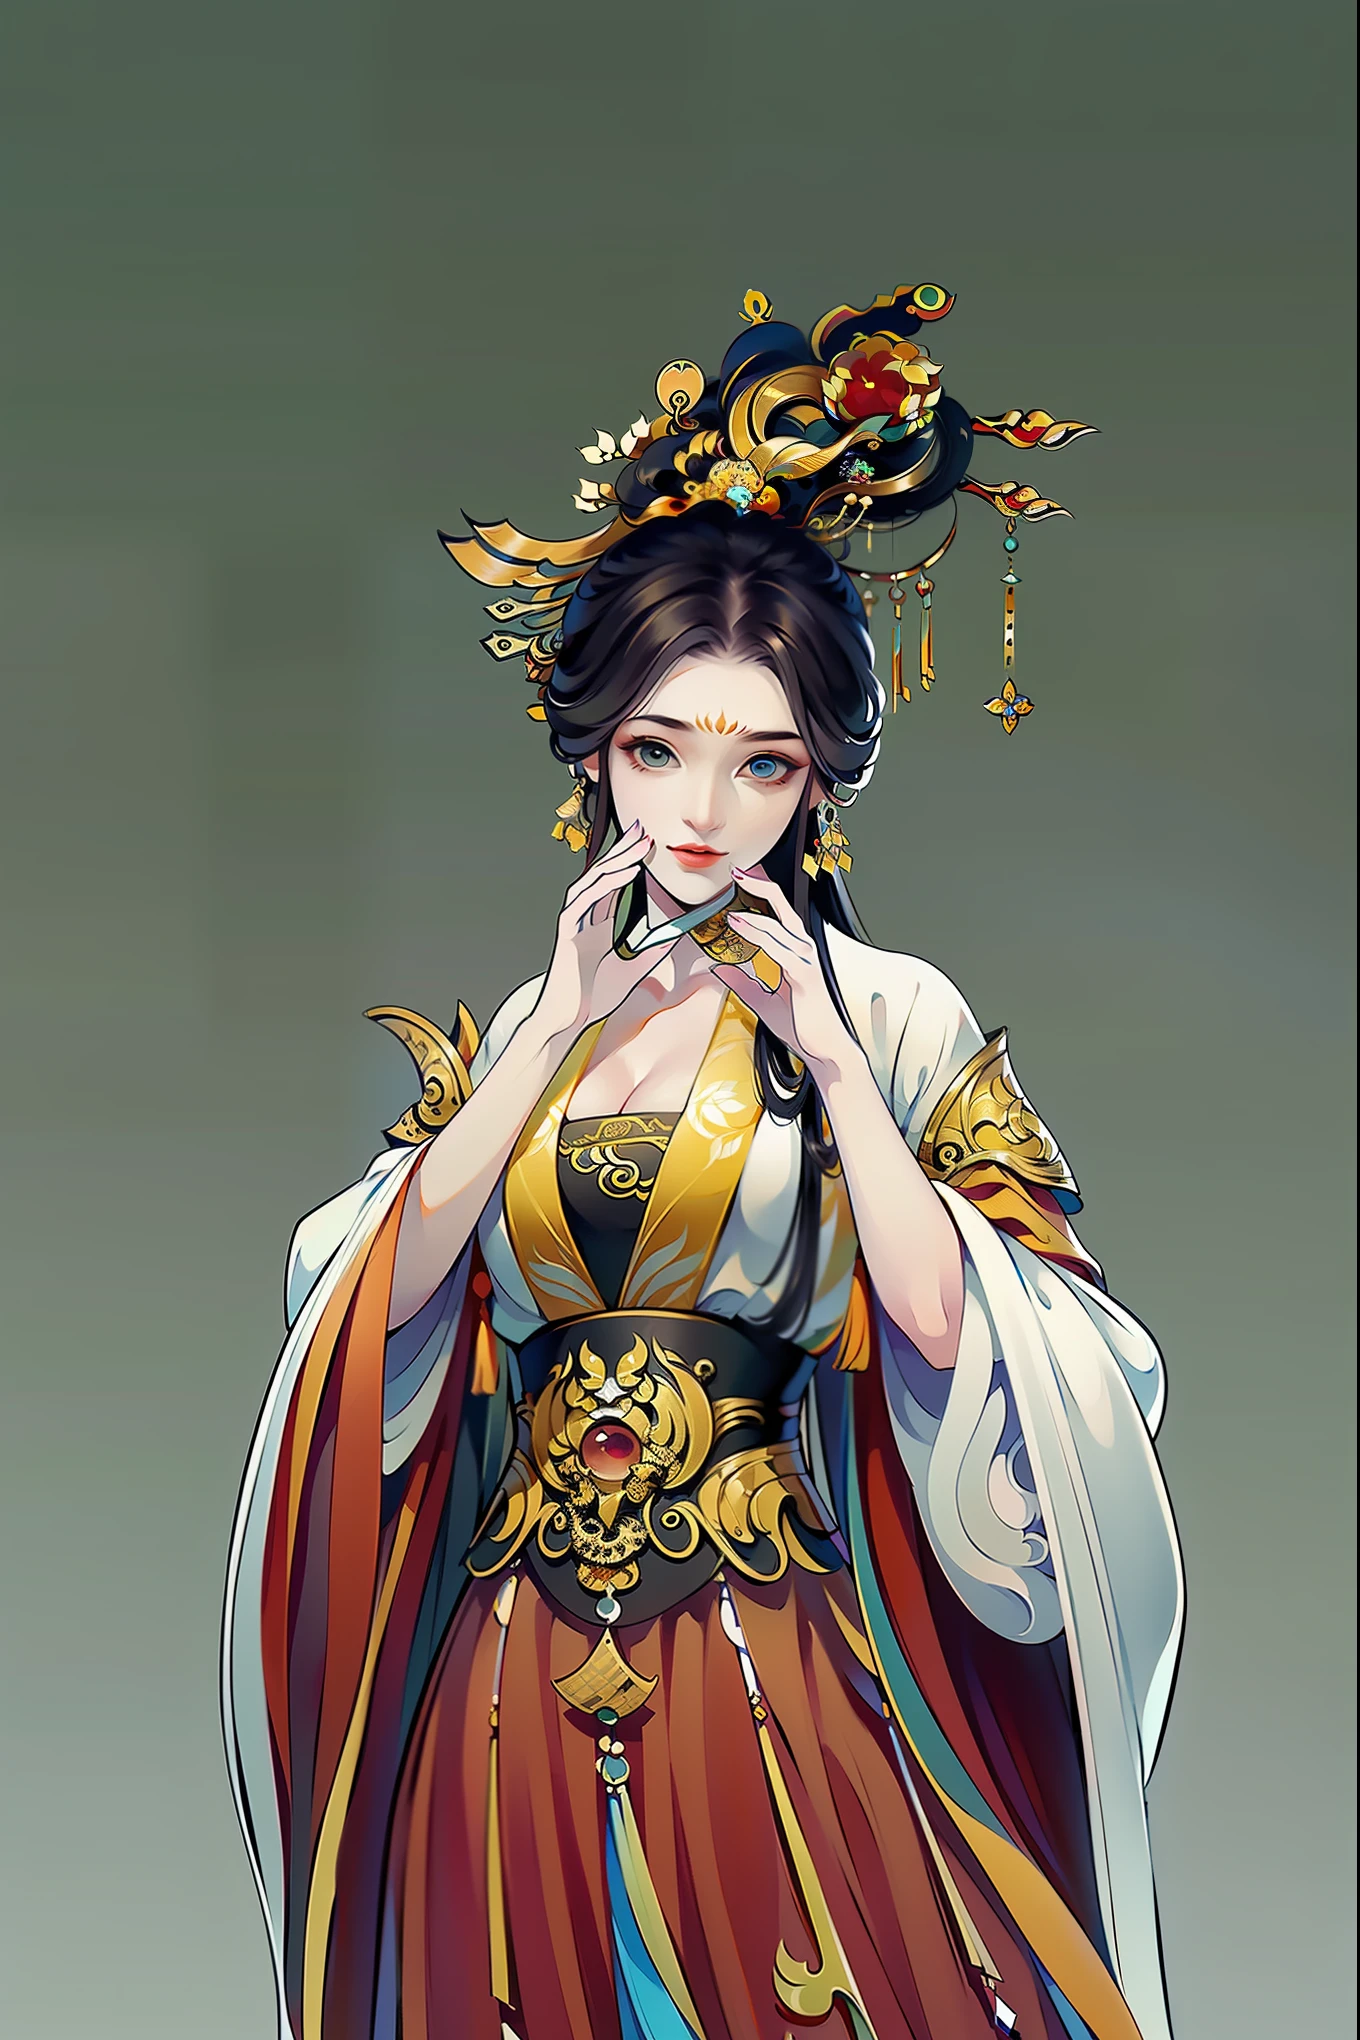 （masterpiece，super detailed，HD details，highly detailed art）1 girl，Half body，xianxia，monochrome，monotonous，elegant，Highly detailed character designs from East Asia，Game character costume design，simple，ultra high resolution, sharp focus, epic work, masterpiece, (Very detailed CG unified 8k wallpaper)，pretty face，beautiful eyes，HD details